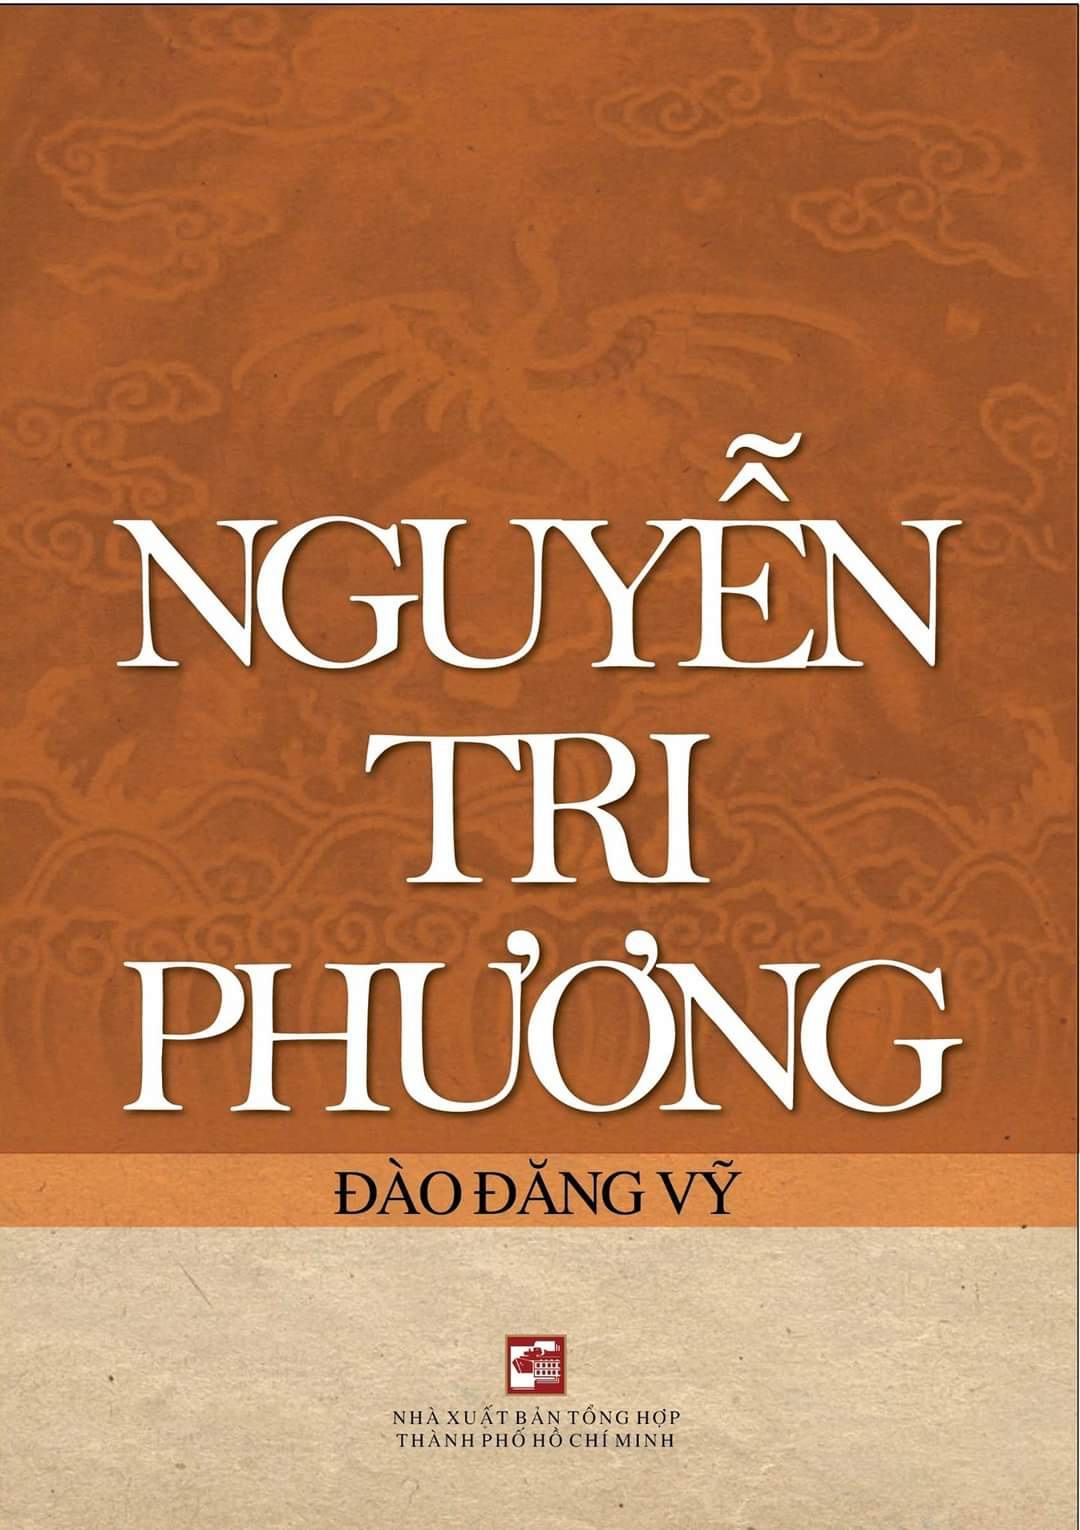 Sach ve Nguyen Tri Phuong anh 2